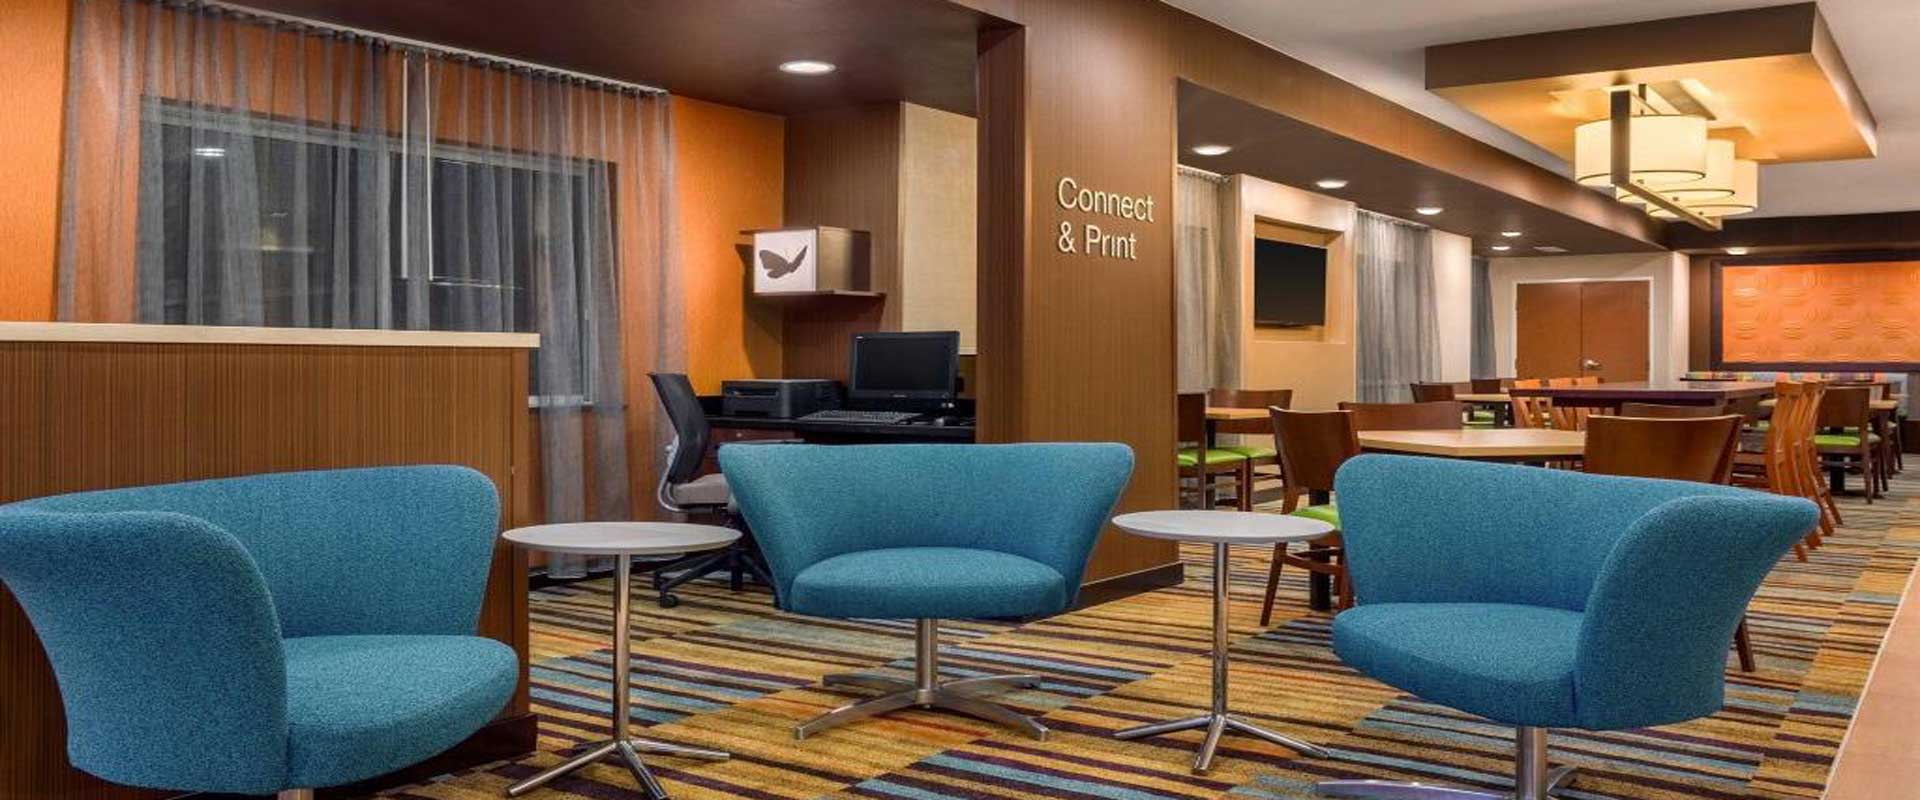 Comfort Inn & Suites | Texas City Clean Accommodations